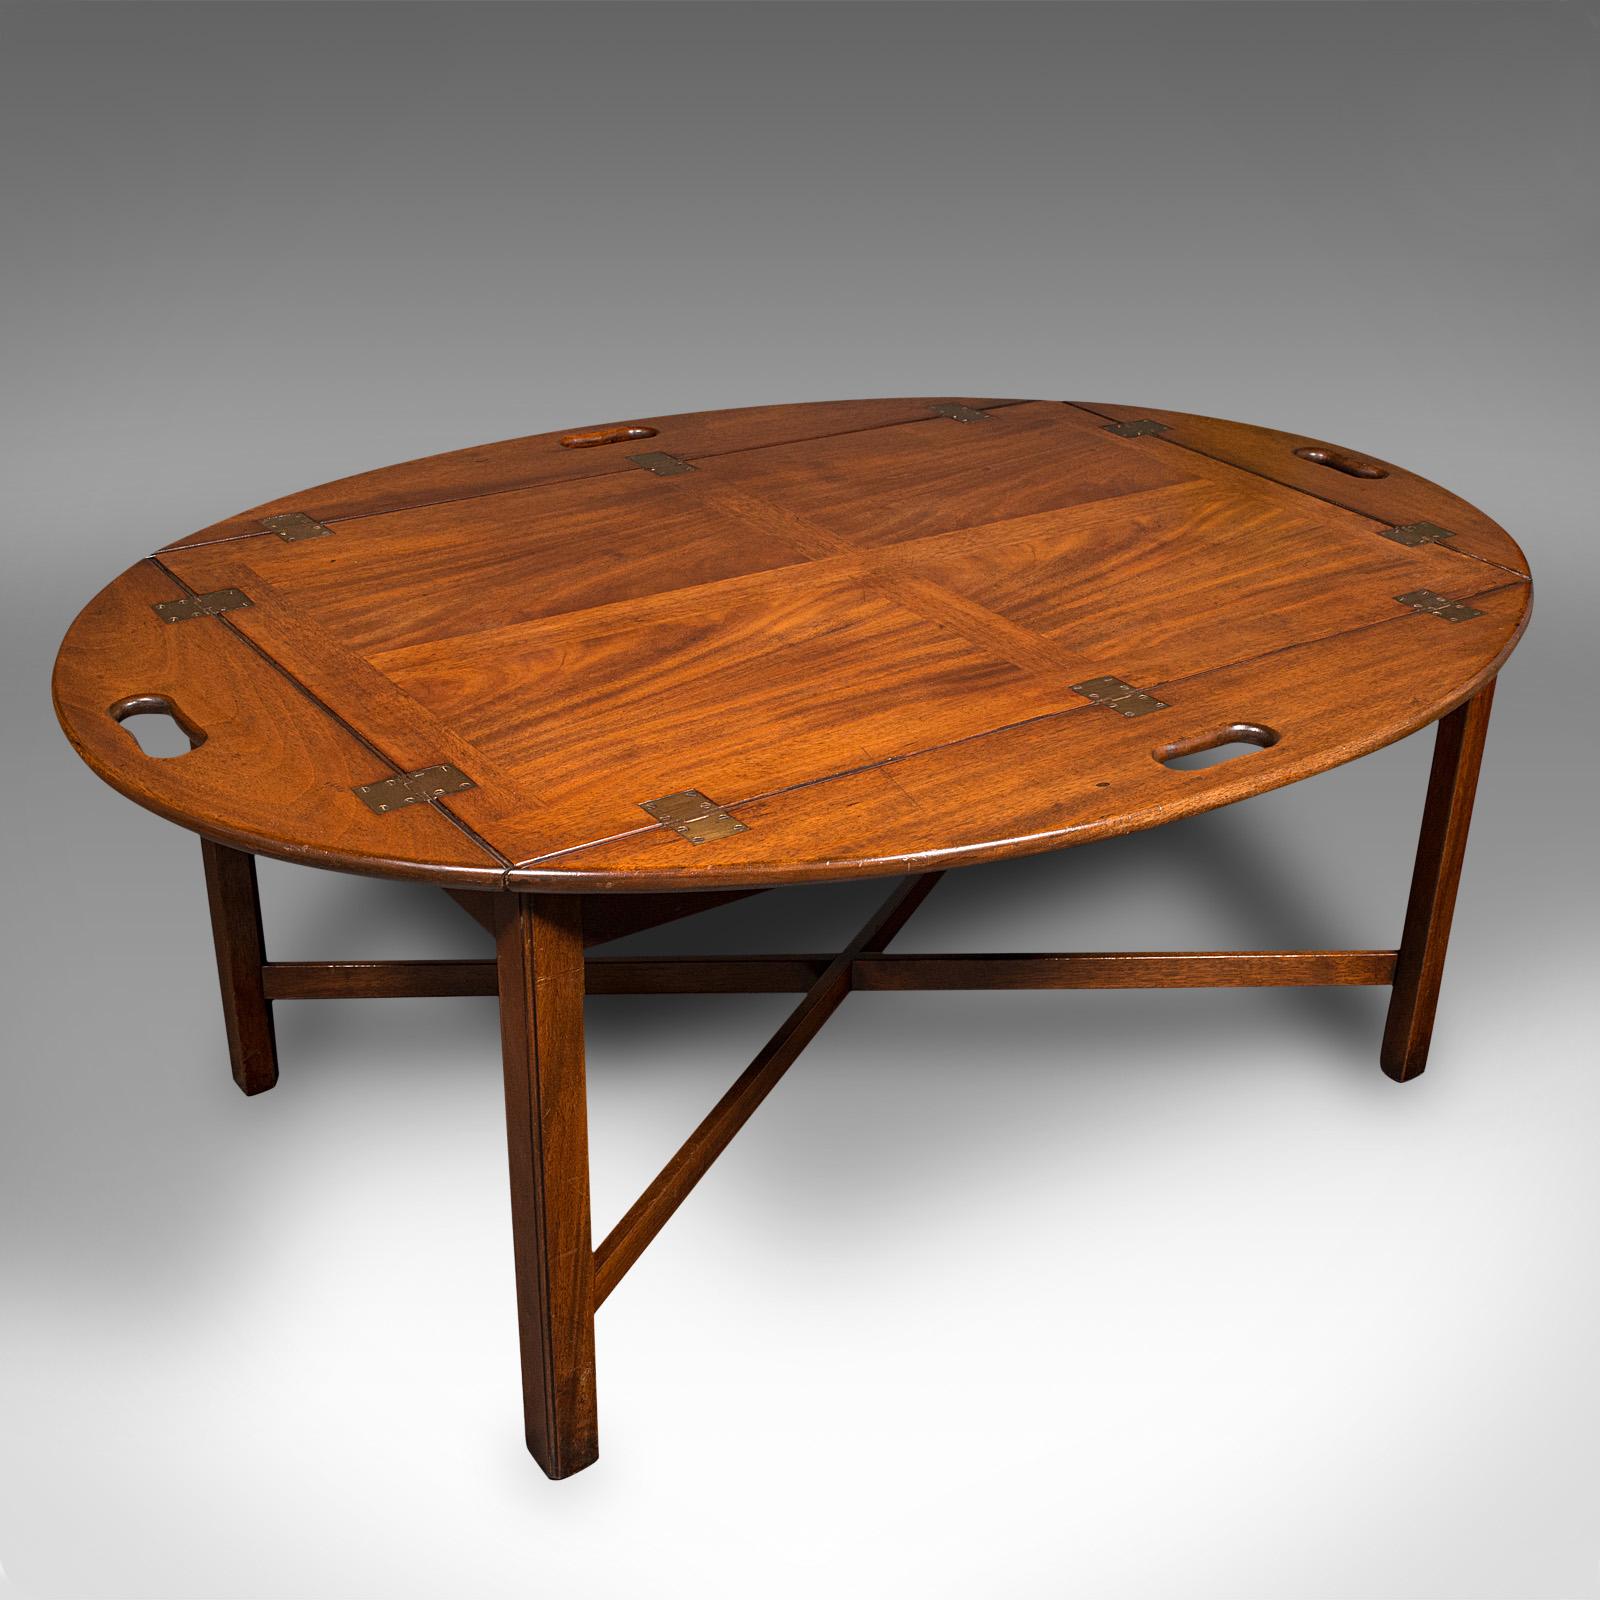 This is an antique ship's serving table. An English, mahogany butler's stand with galley sides, dating to the Edwardian period, circa 1910.

Of superb proportion with beautiful figuring
Displays a desirable aged patina and in good order
Select